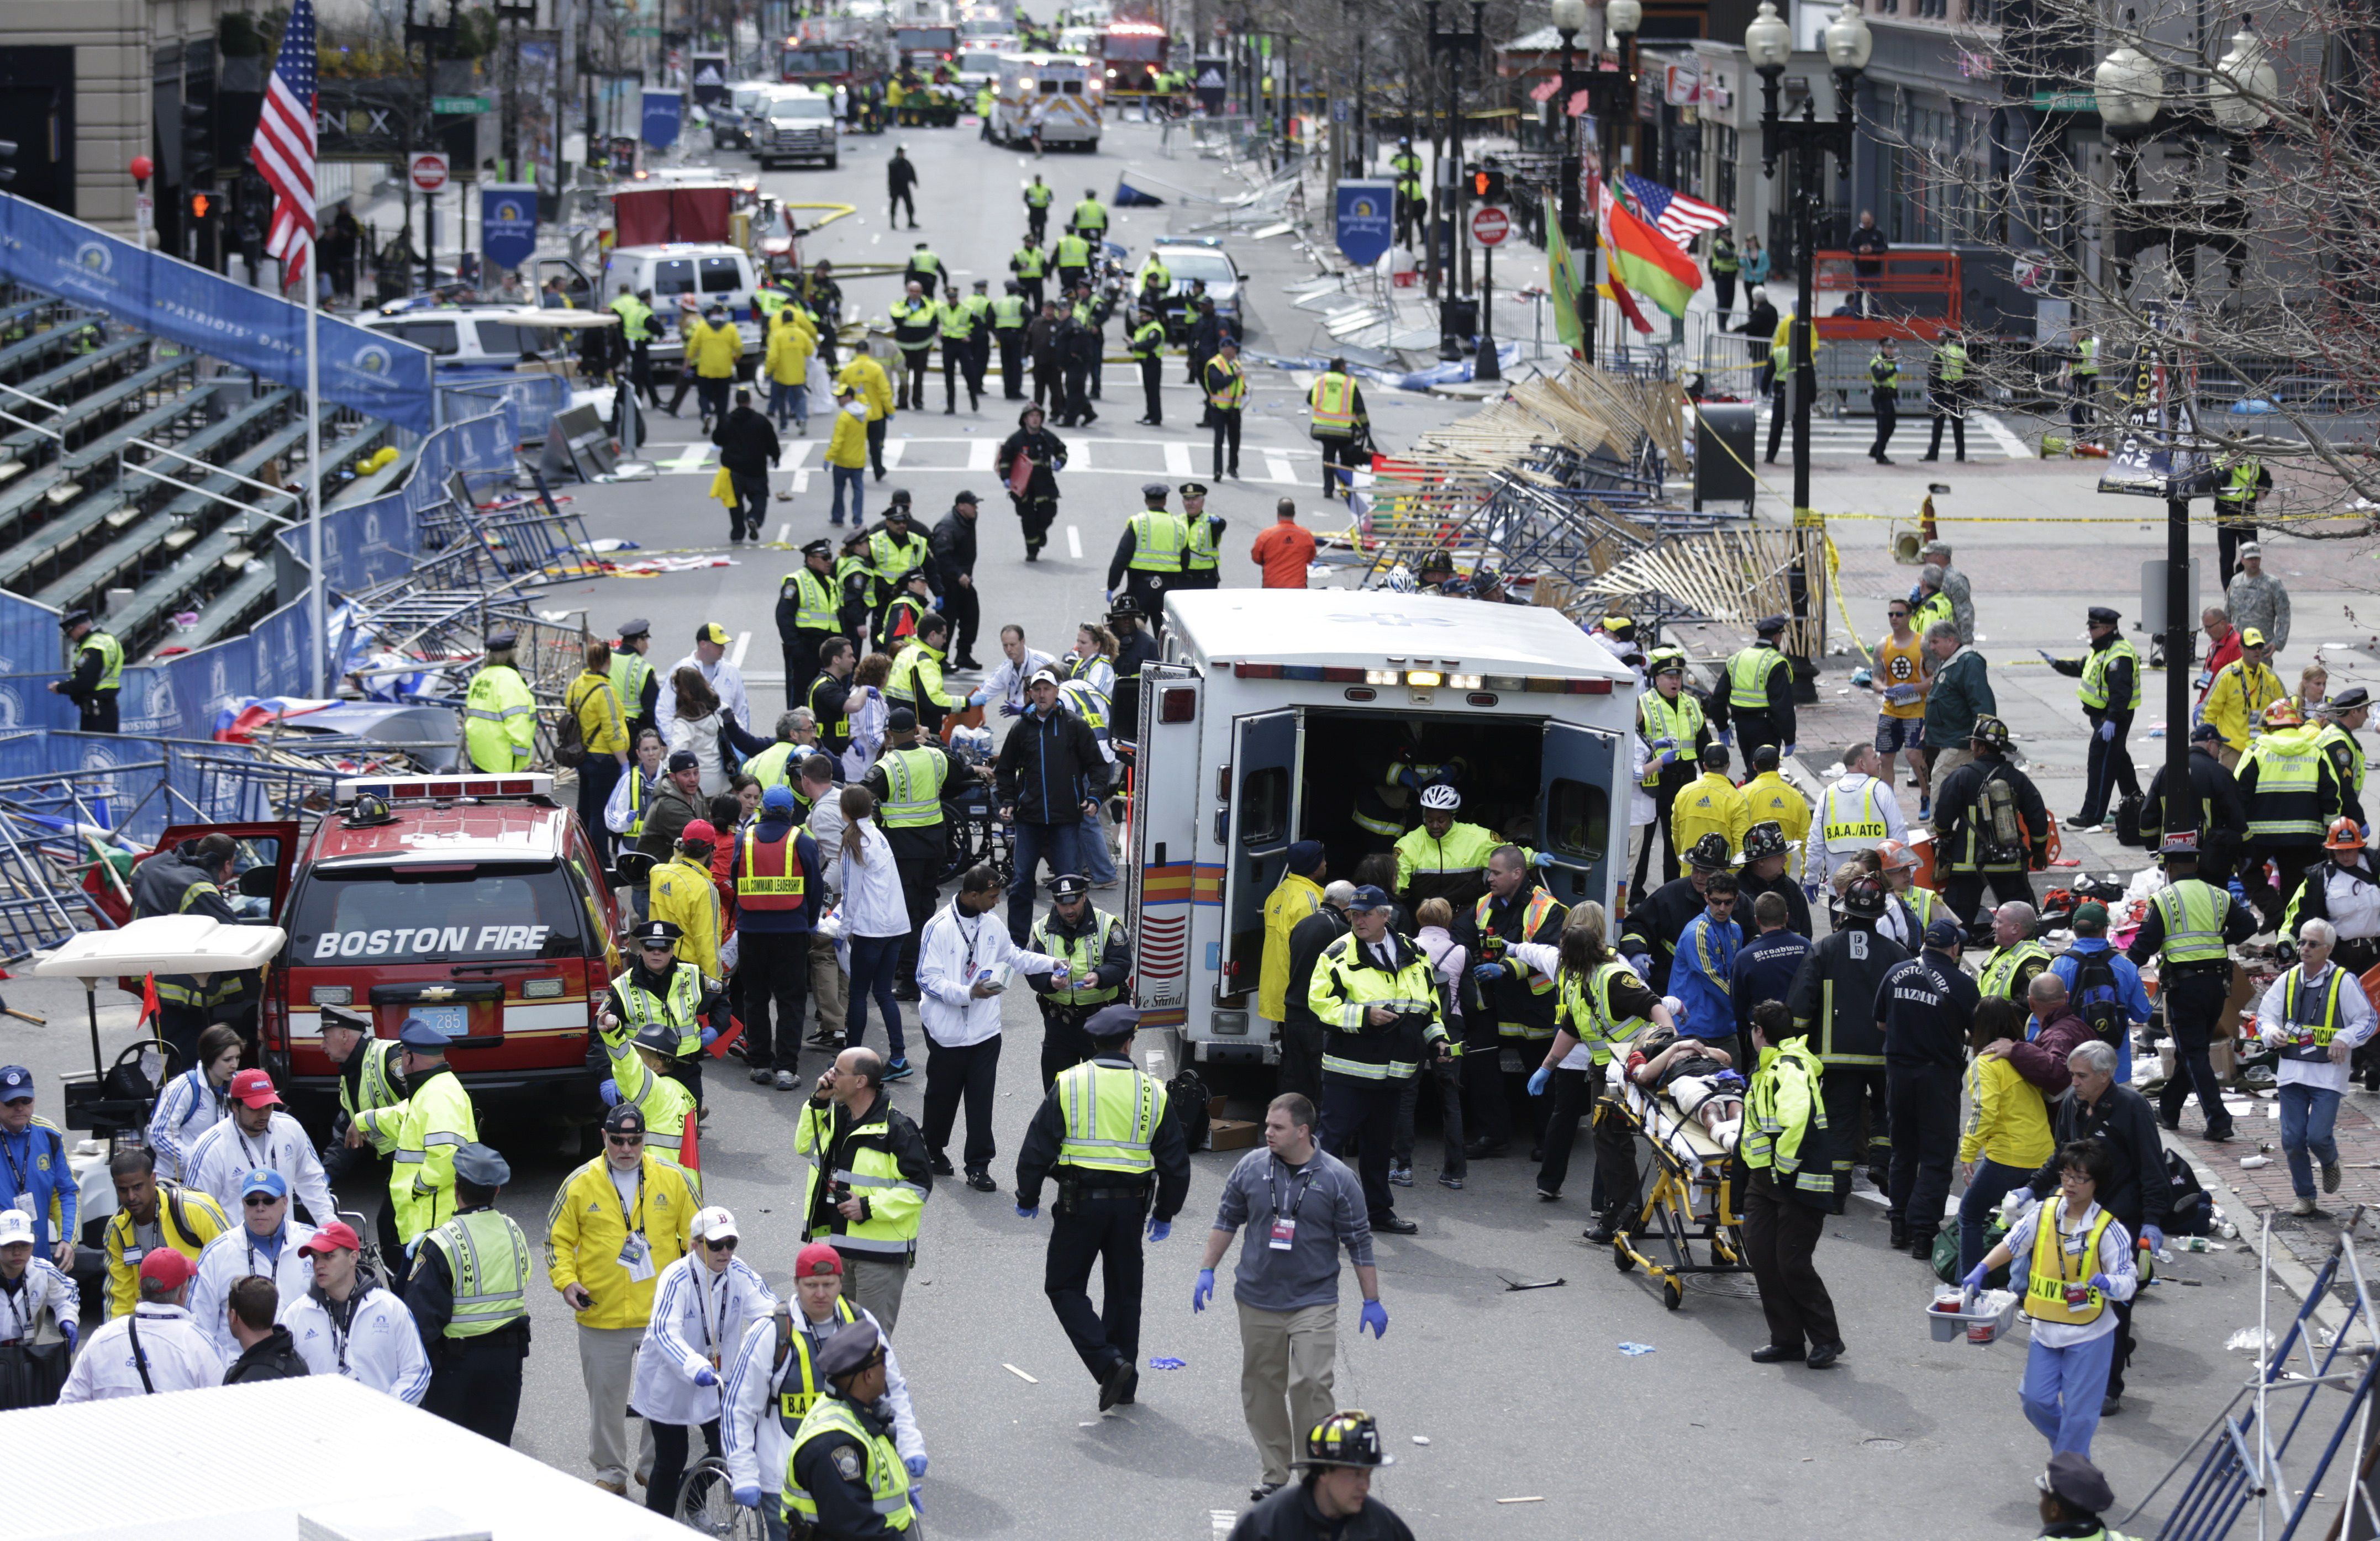 Medical workers aid injured people at the finish line of the 2013 Boston Marathon following an explosion